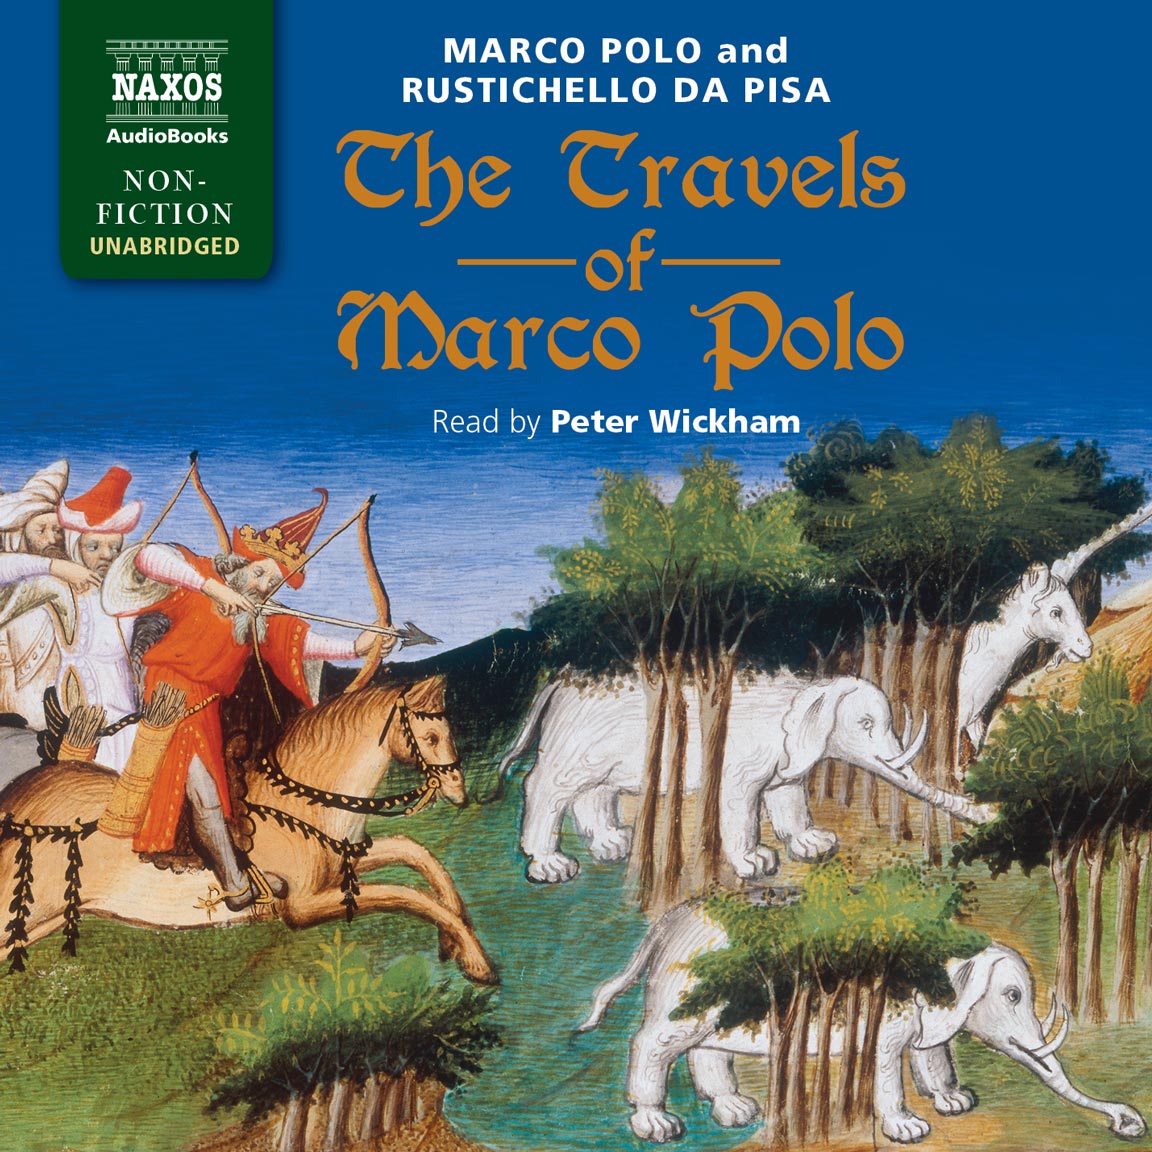 The Travels of Marco Polo (unabridged)